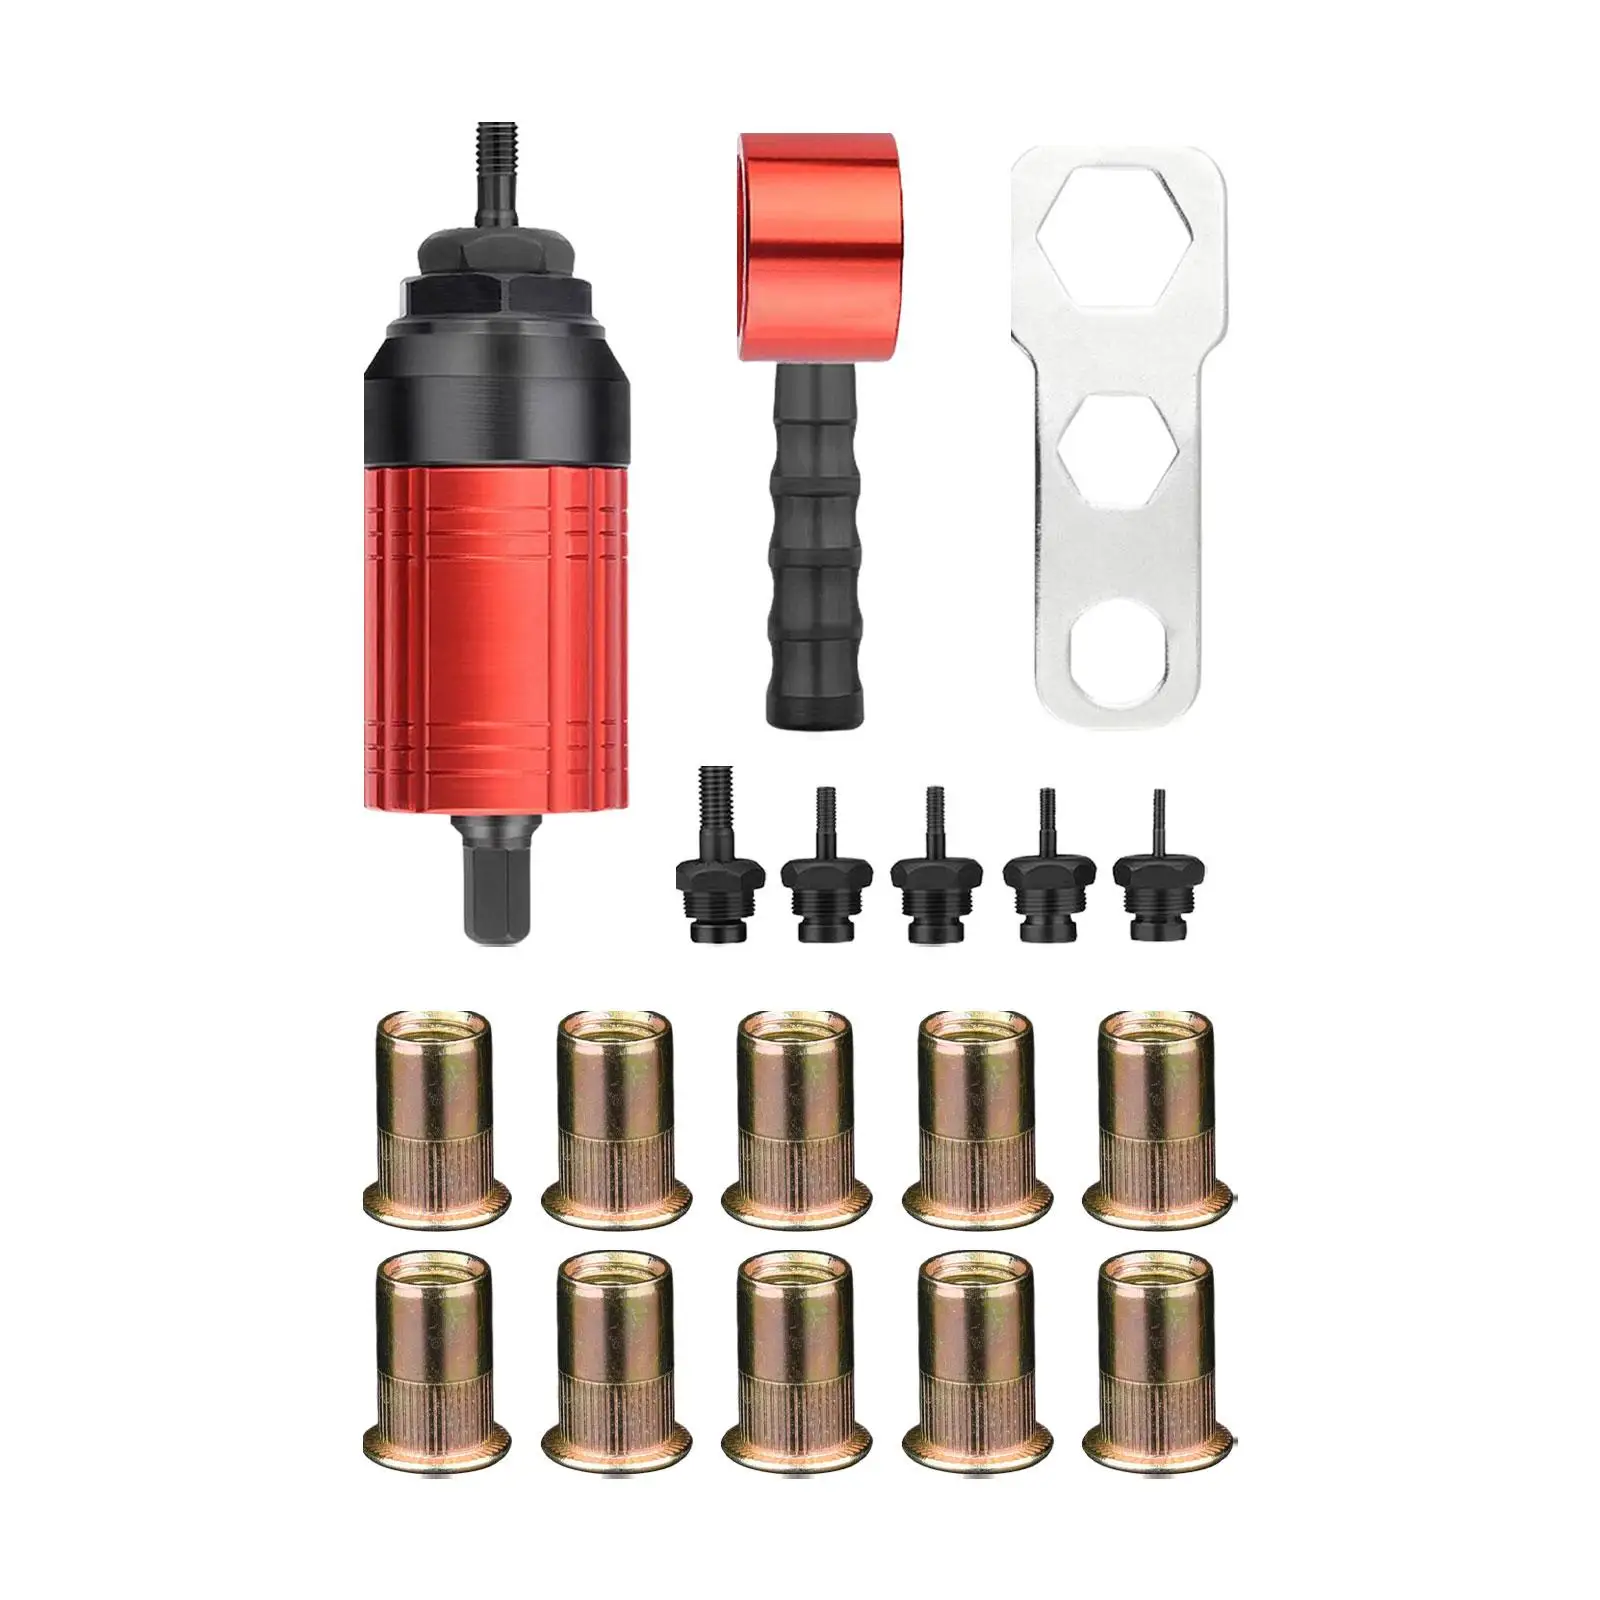 Rivet Nut Drill Adaptor Attachment Riveting Tools Threaded Insert for Furniture Electrical Appliance Architecture Repair Car